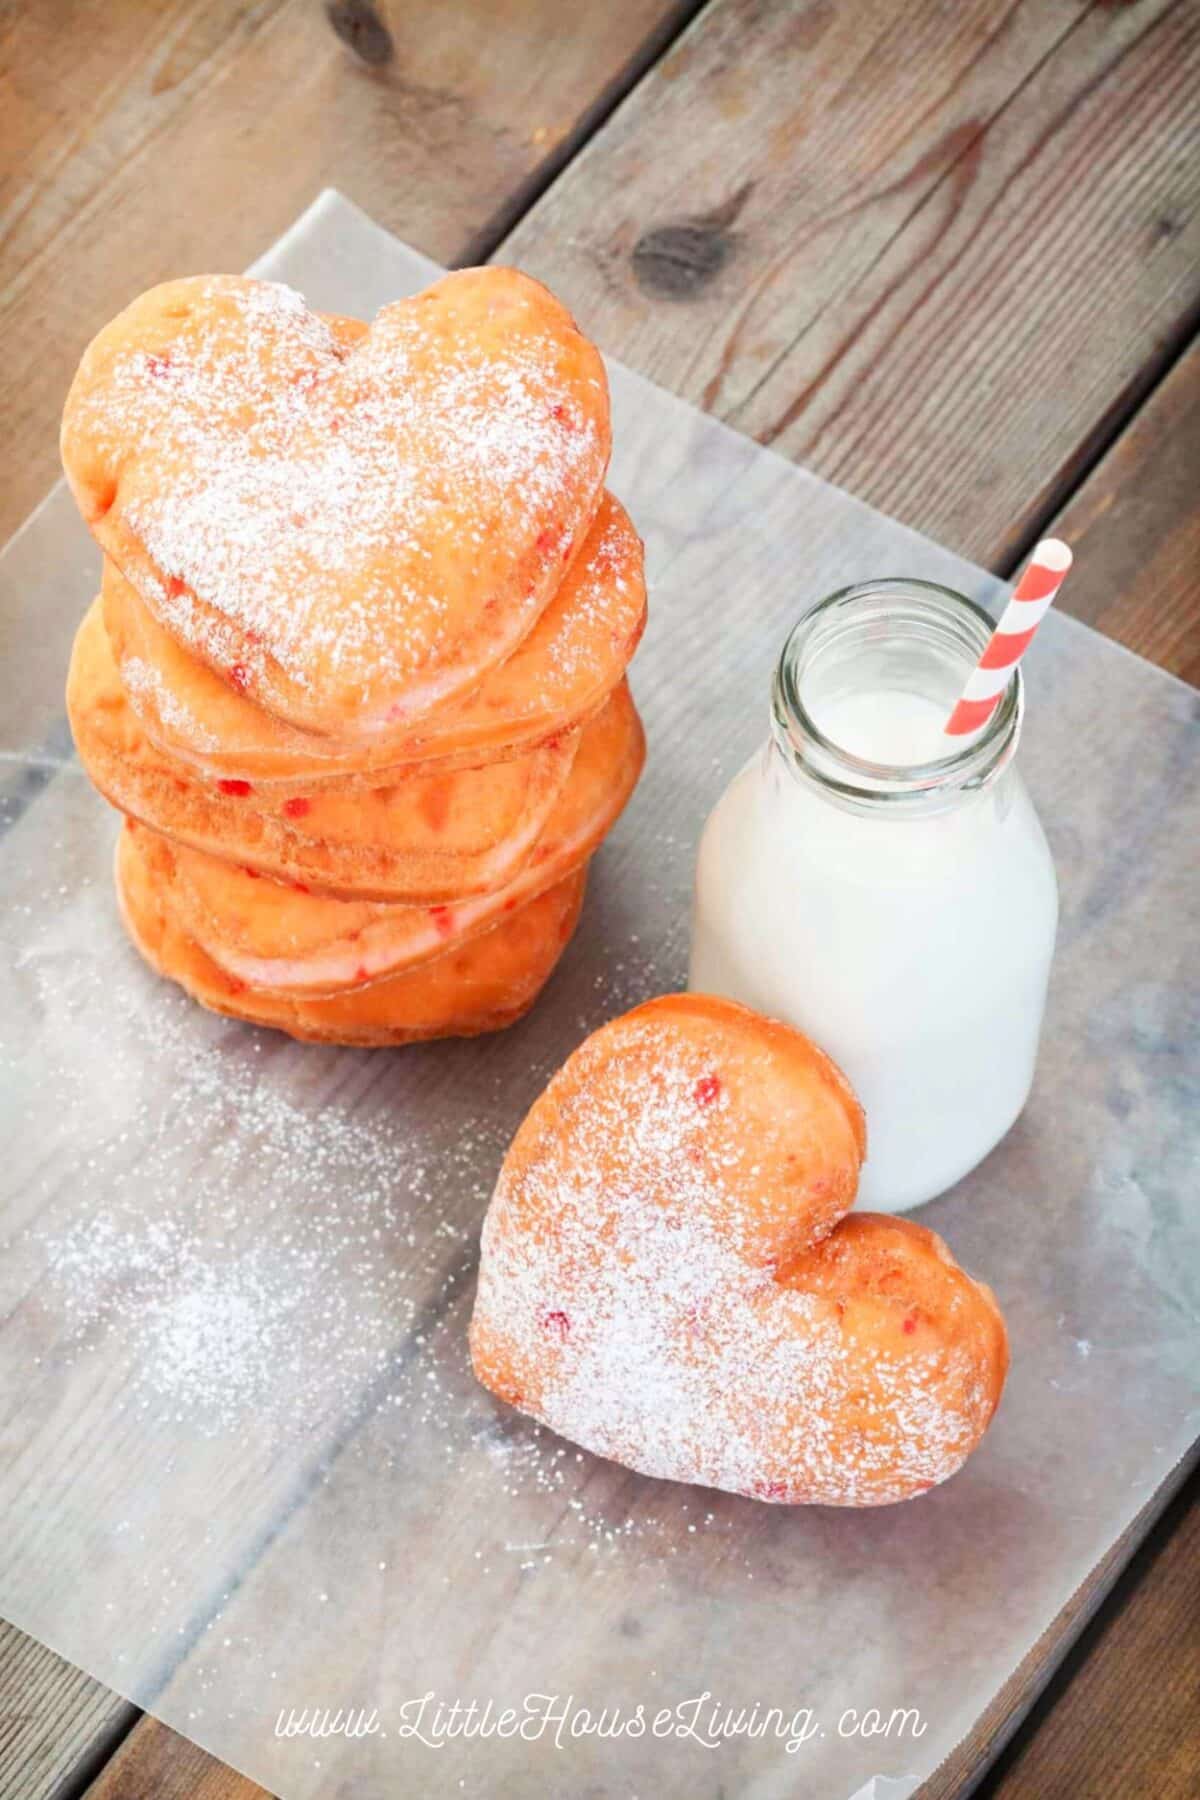 Heart shaped doughnuts with a glass of milk.